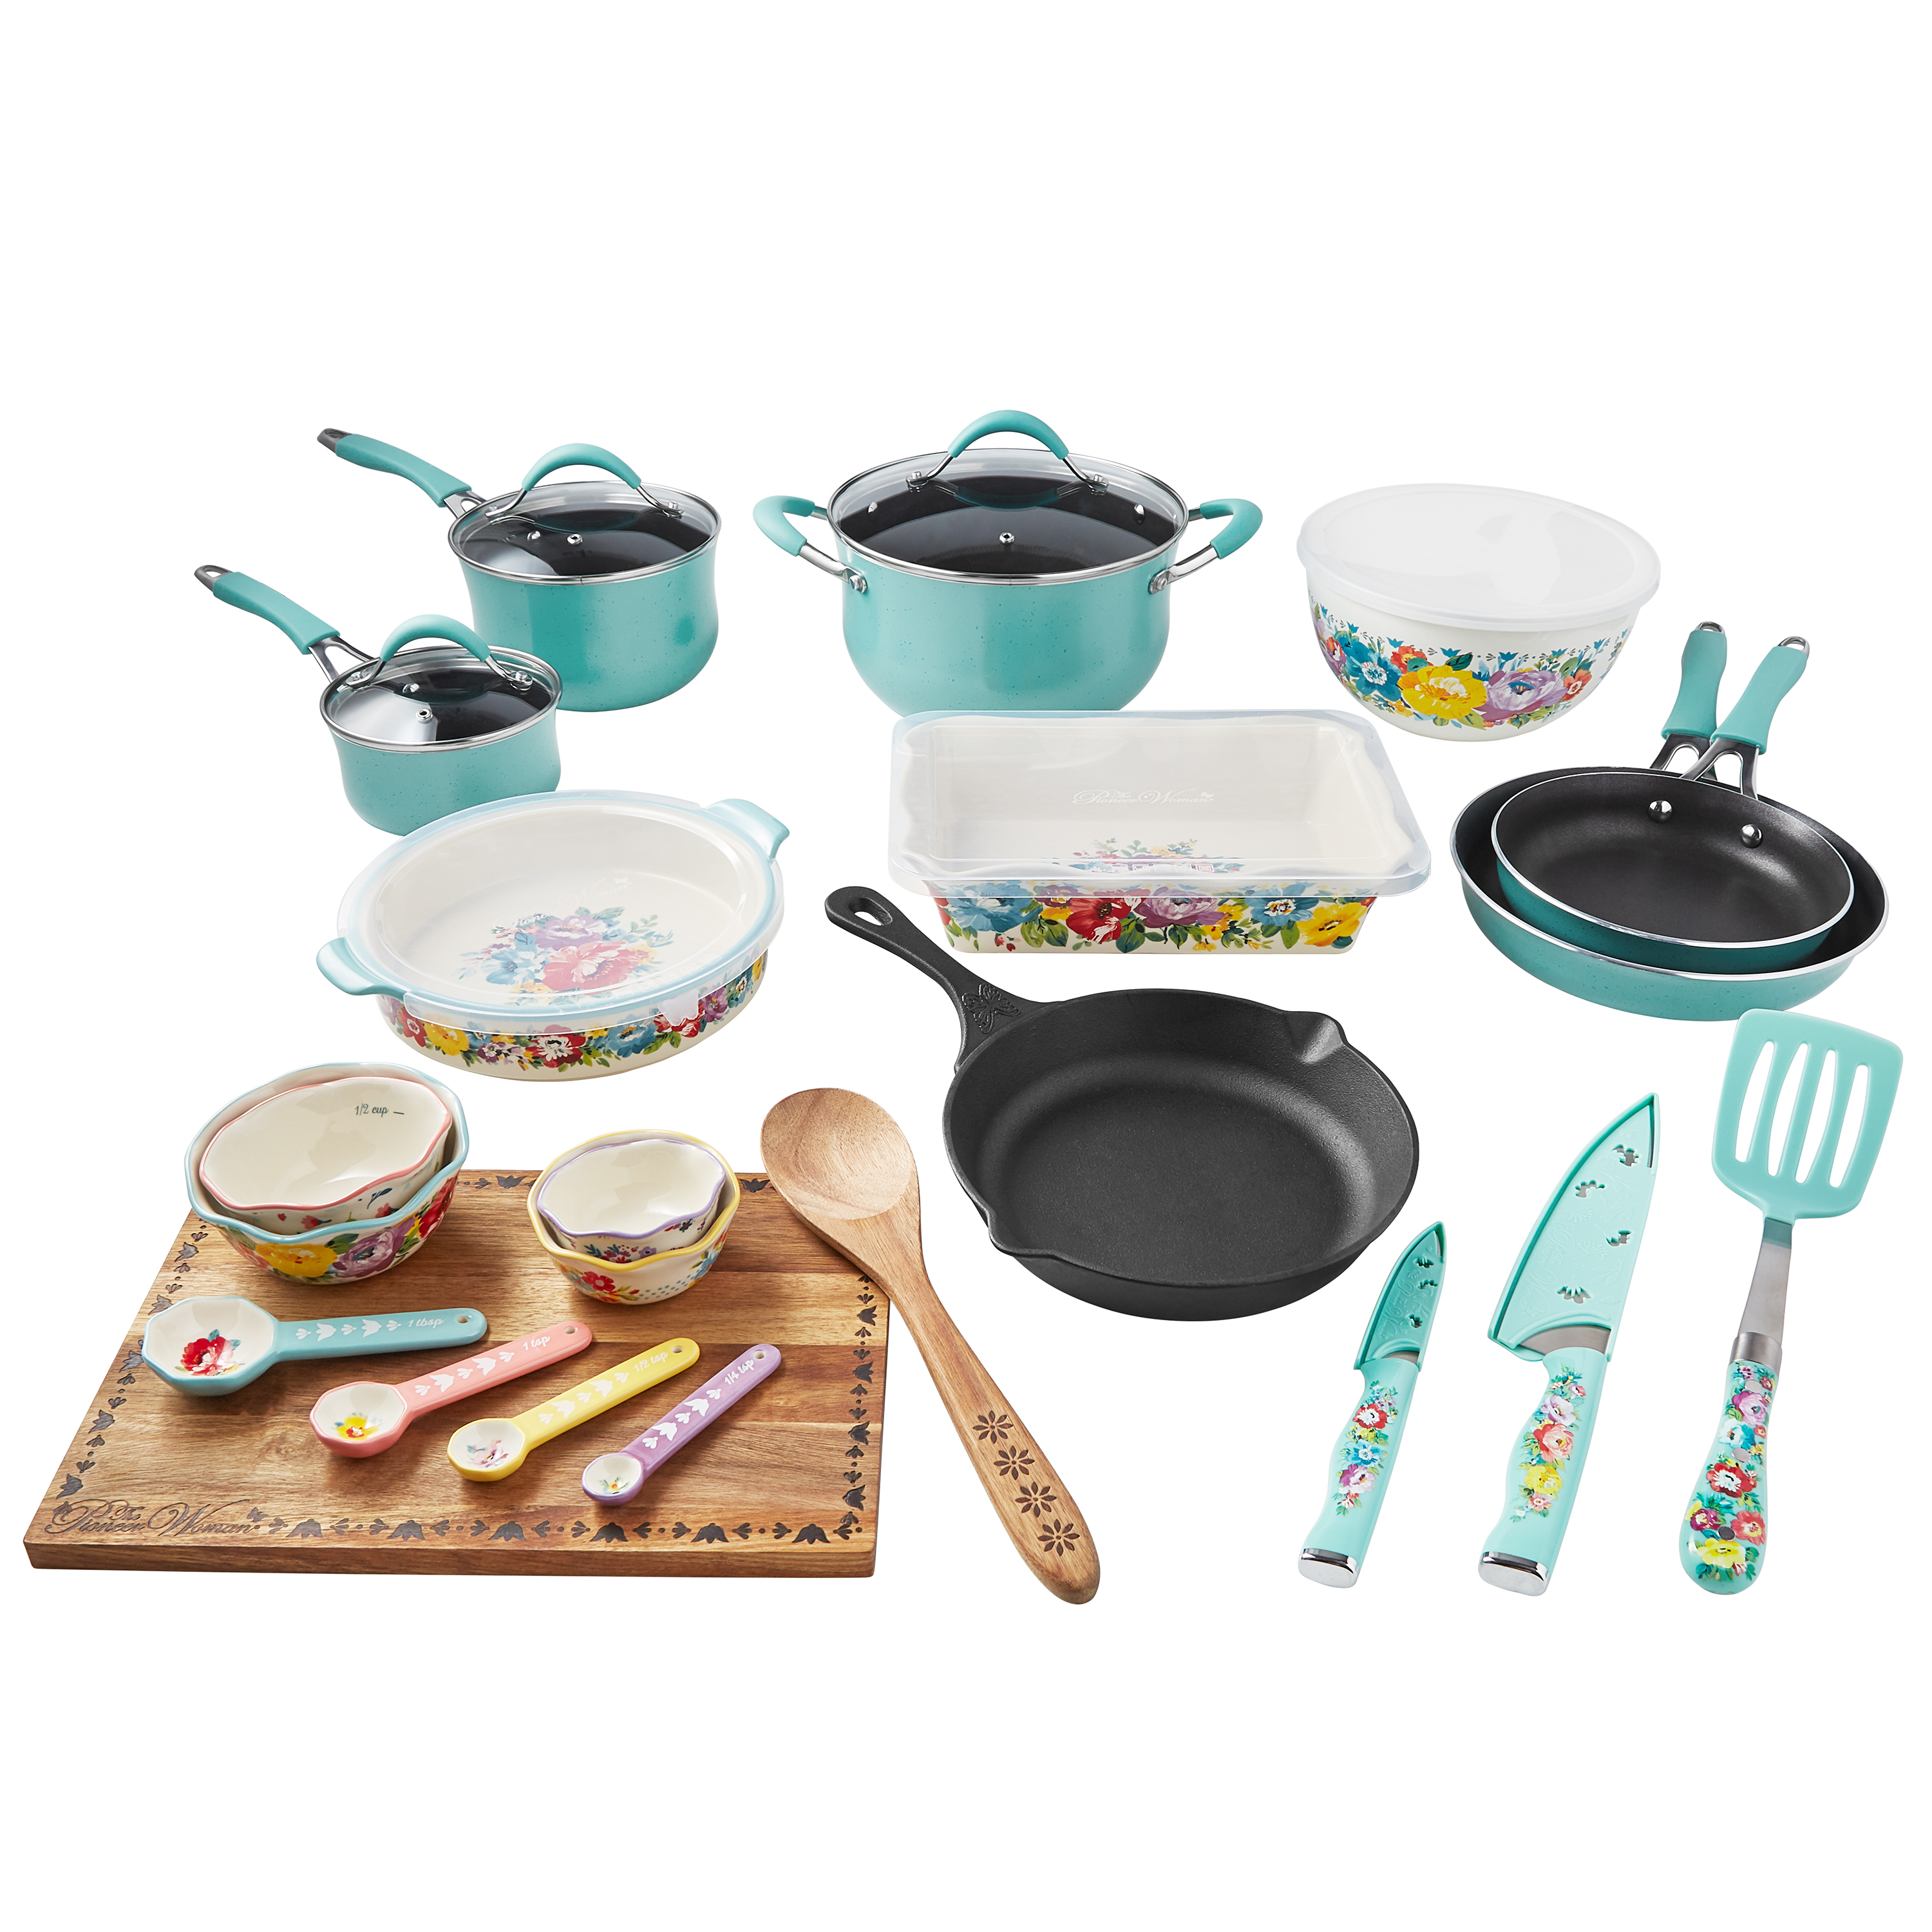 The Pioneer Woman Sweet Romance 30-Piece Nonstick Cookware Set, Turquoise - image 1 of 13